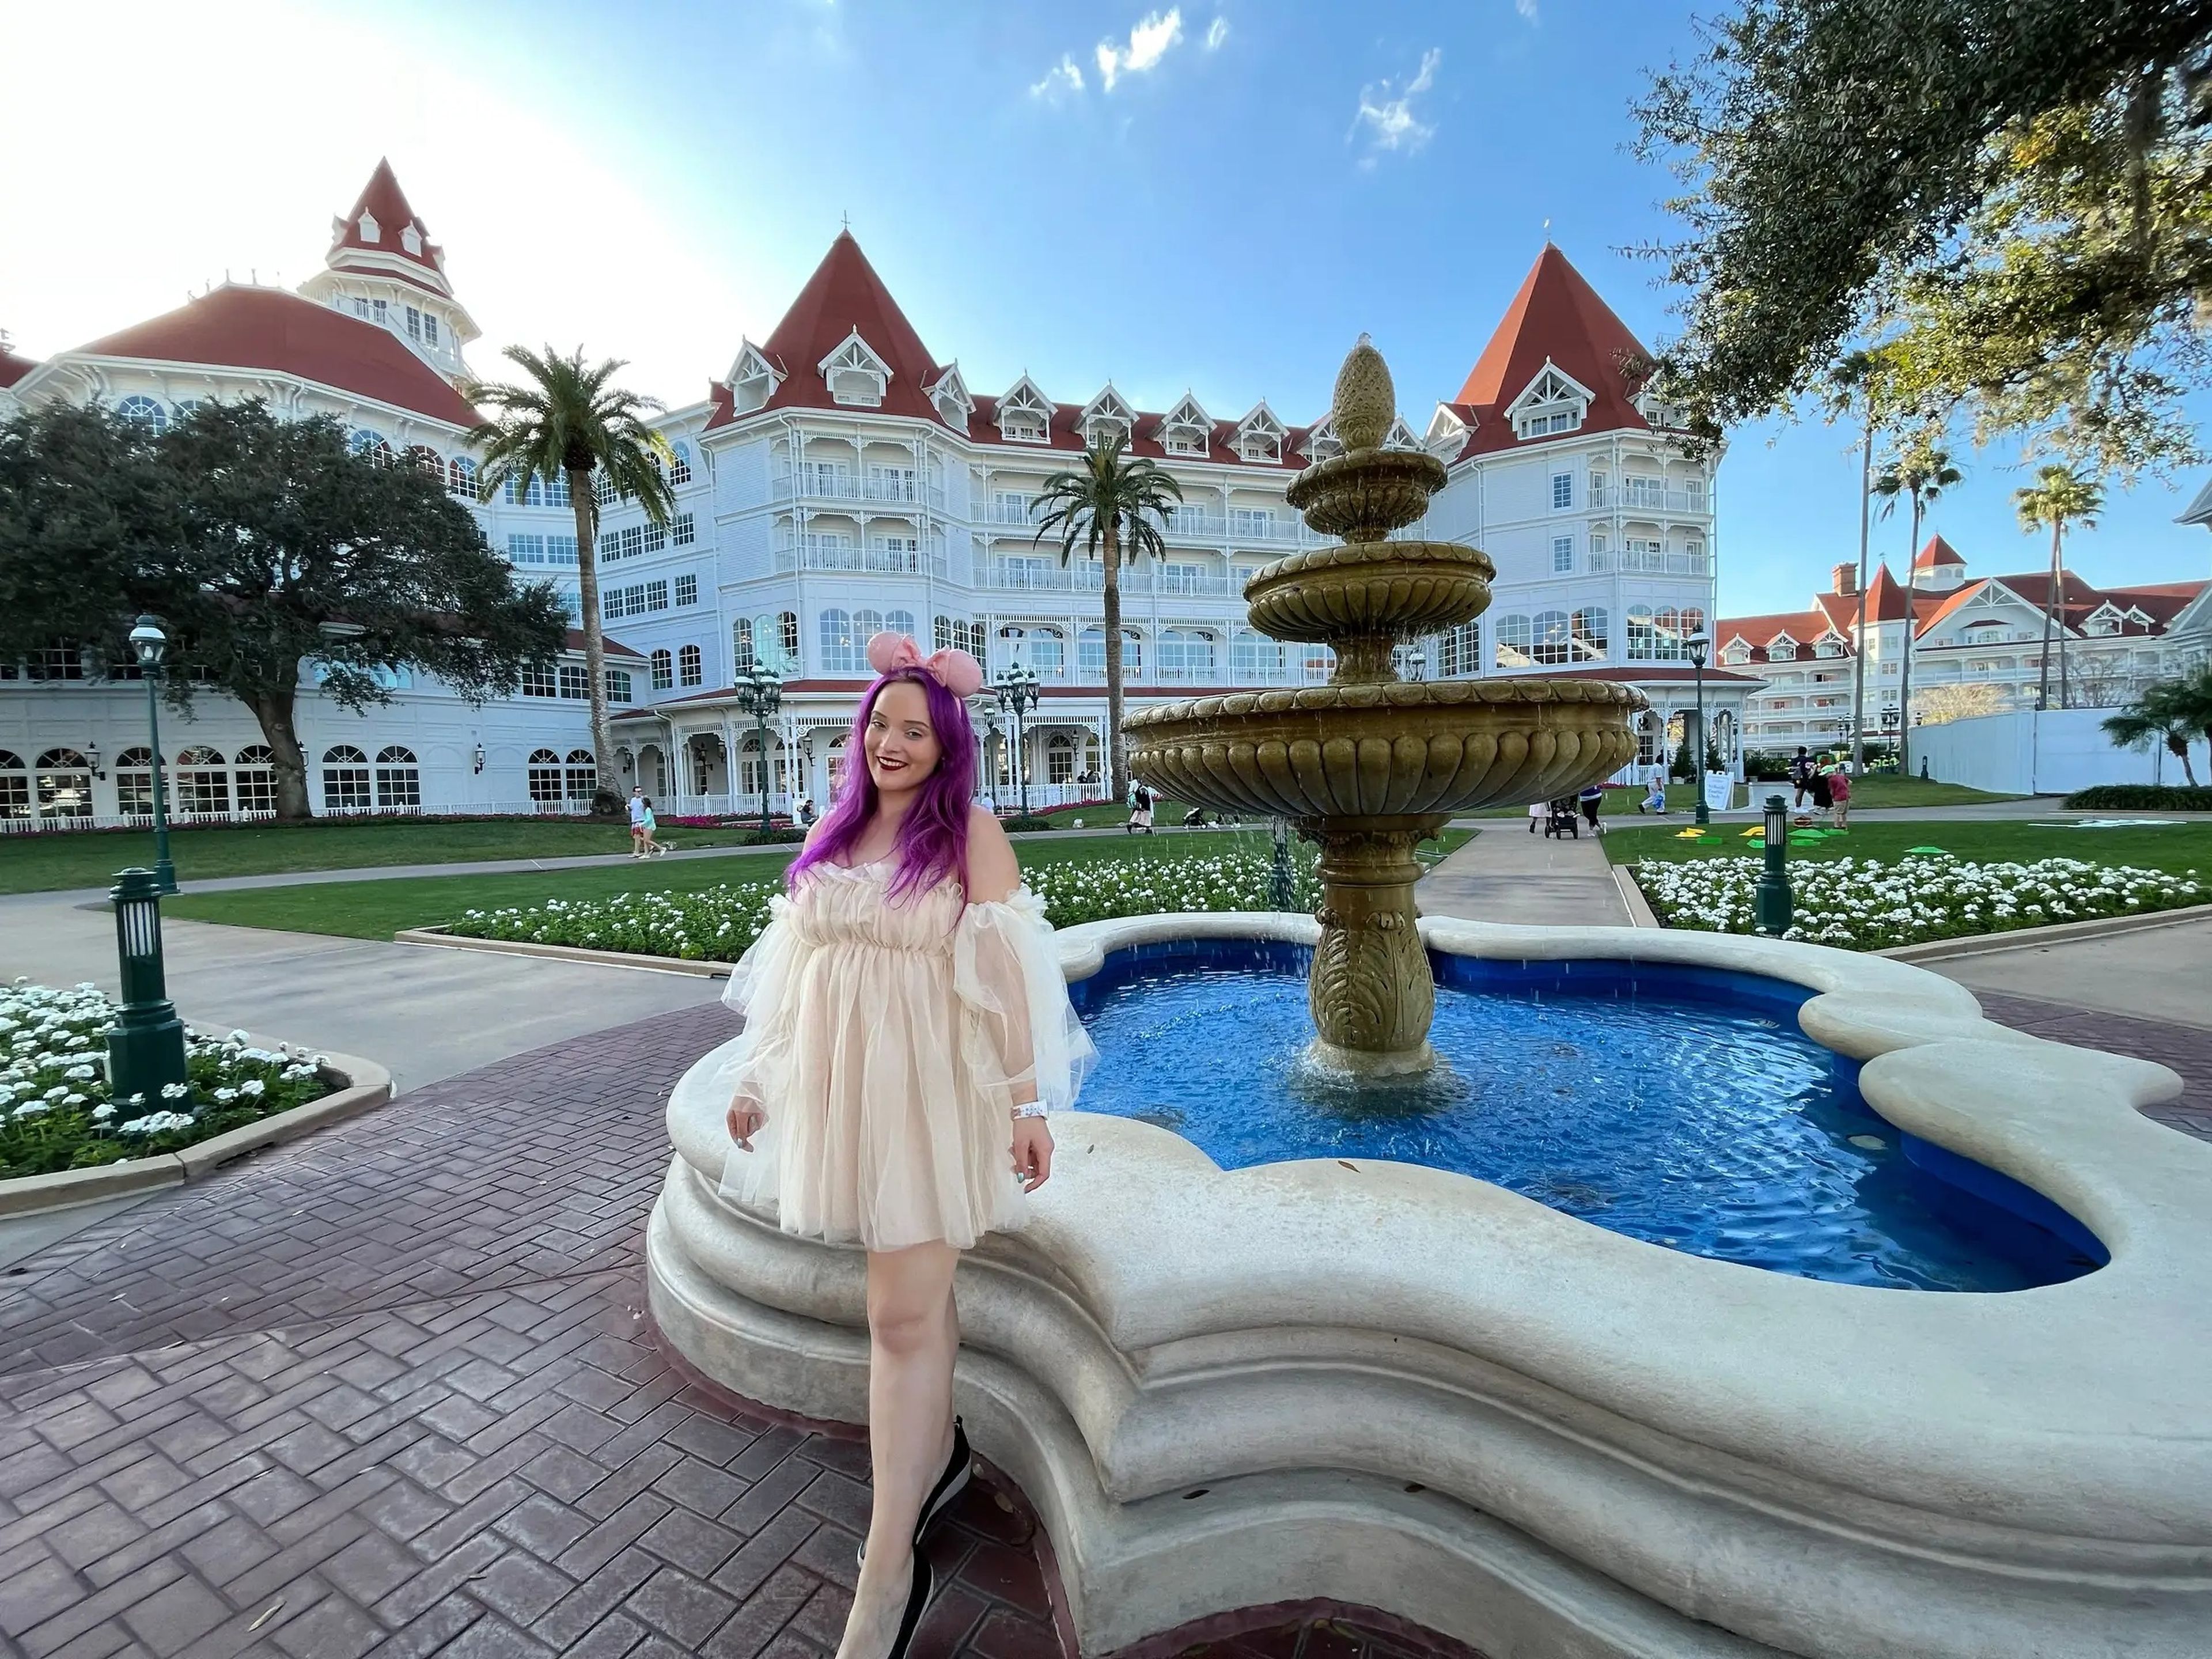 jenna posing for a photo with a fountain on the grounds of the grand floridian resort